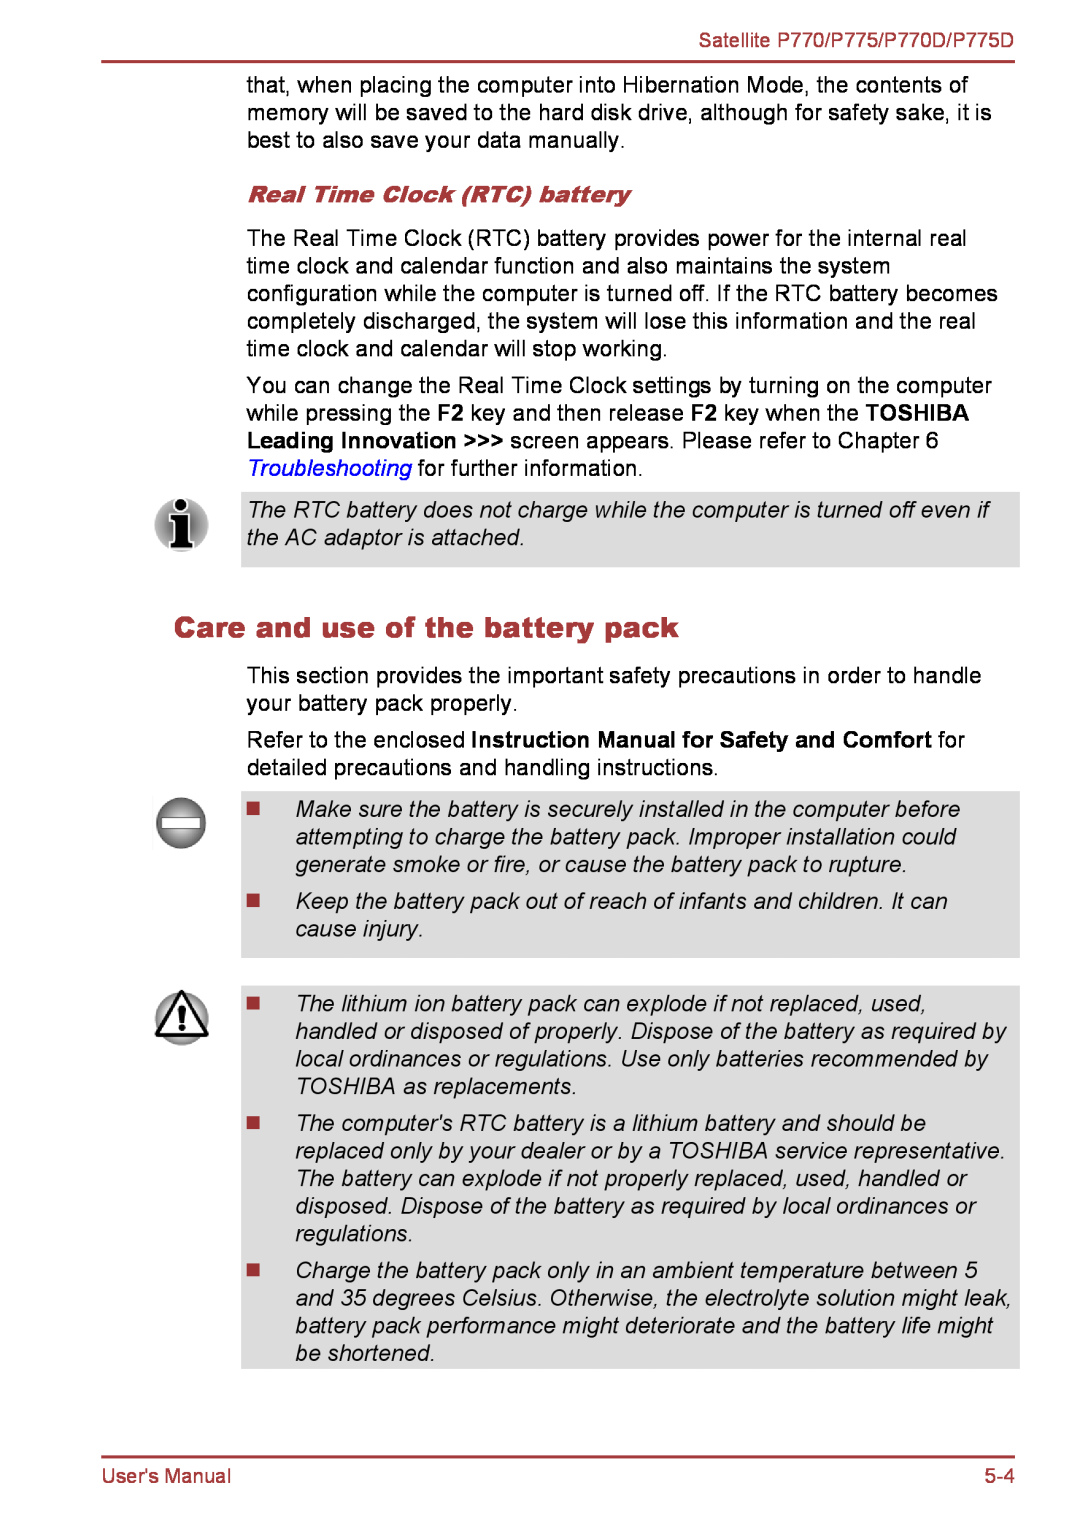 Toshiba P770 user manual Care and use of the battery pack, Real Time Clock RTC battery 